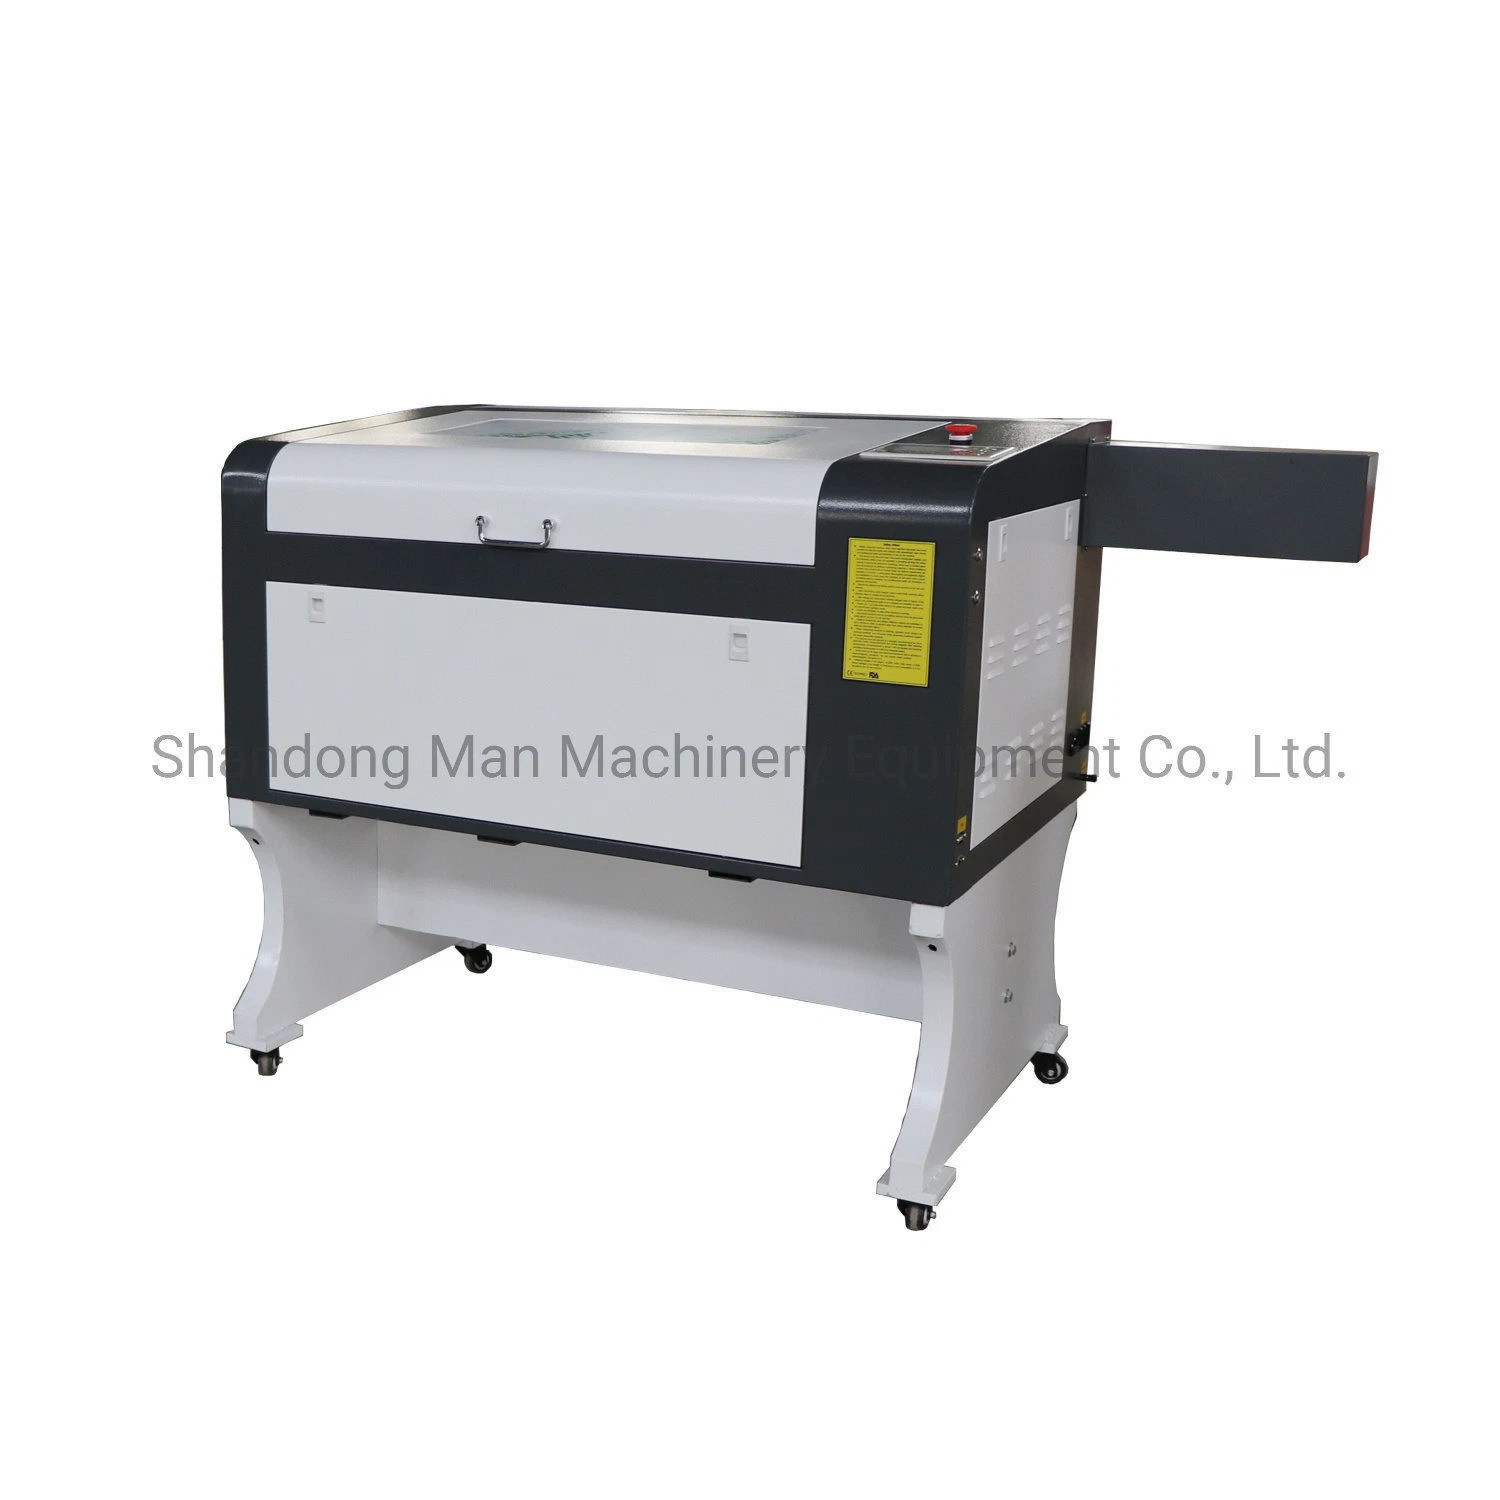 150W CO2 Mixed Laser Engraving and Cutting Equipment for Agricultural Machinery